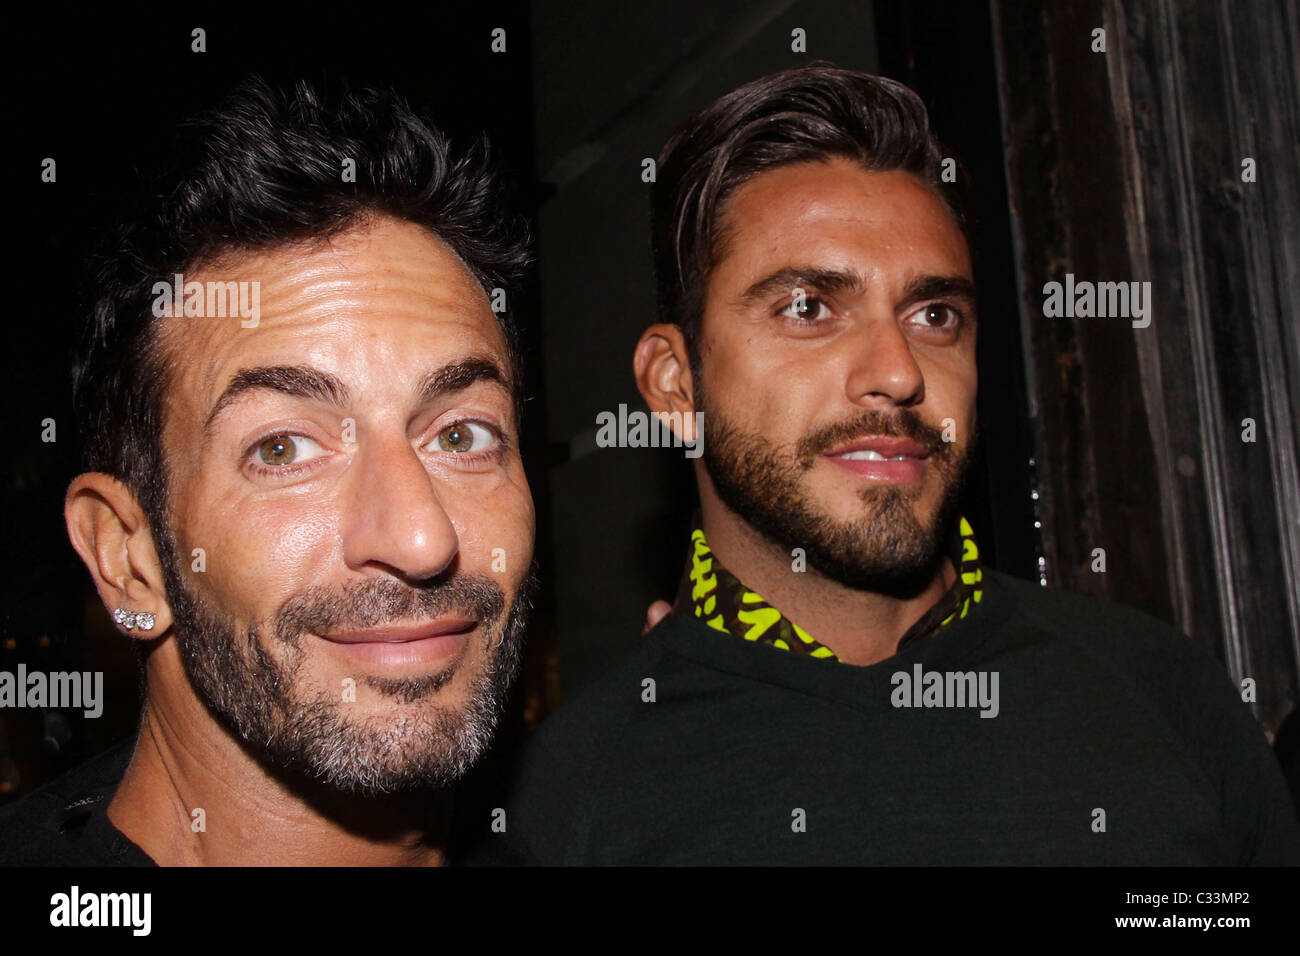 From left, designer Stephen Sprouse's mother Joanne Sprouse, designer Marc  Jacobs and his husband Lorenzo Martone attend a tribute to designer Stephen  Sprouse hosted by Louis Vuitton at Bowery Ballroom on Thursday